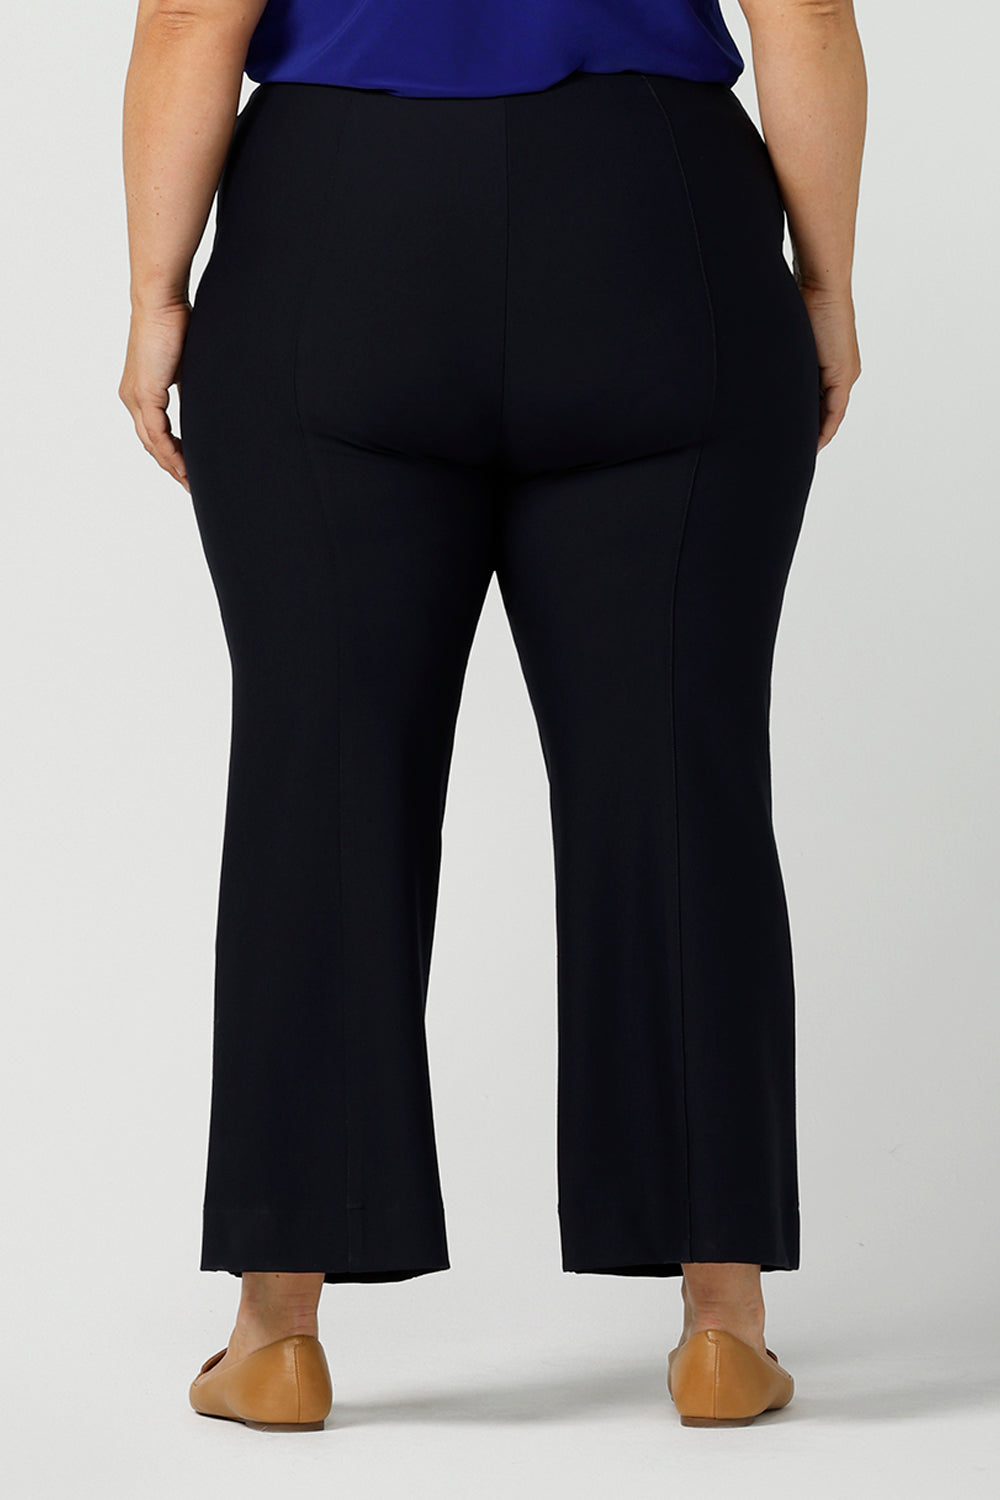 Back view of good pants for curvy women. These flared leg, cropped pants are tailored with back leg seams for smart casual office wear. Worn with a V-neck, flutter sleeve top in cobalt blue, and shown on a size 18 woman, these plus size navy blue pants are made in Australia by Australian and New Zealand women's clothing brand, Leina & Fleur. Shop quality pants in sizes 8 to 24 in their online fashion boutique!